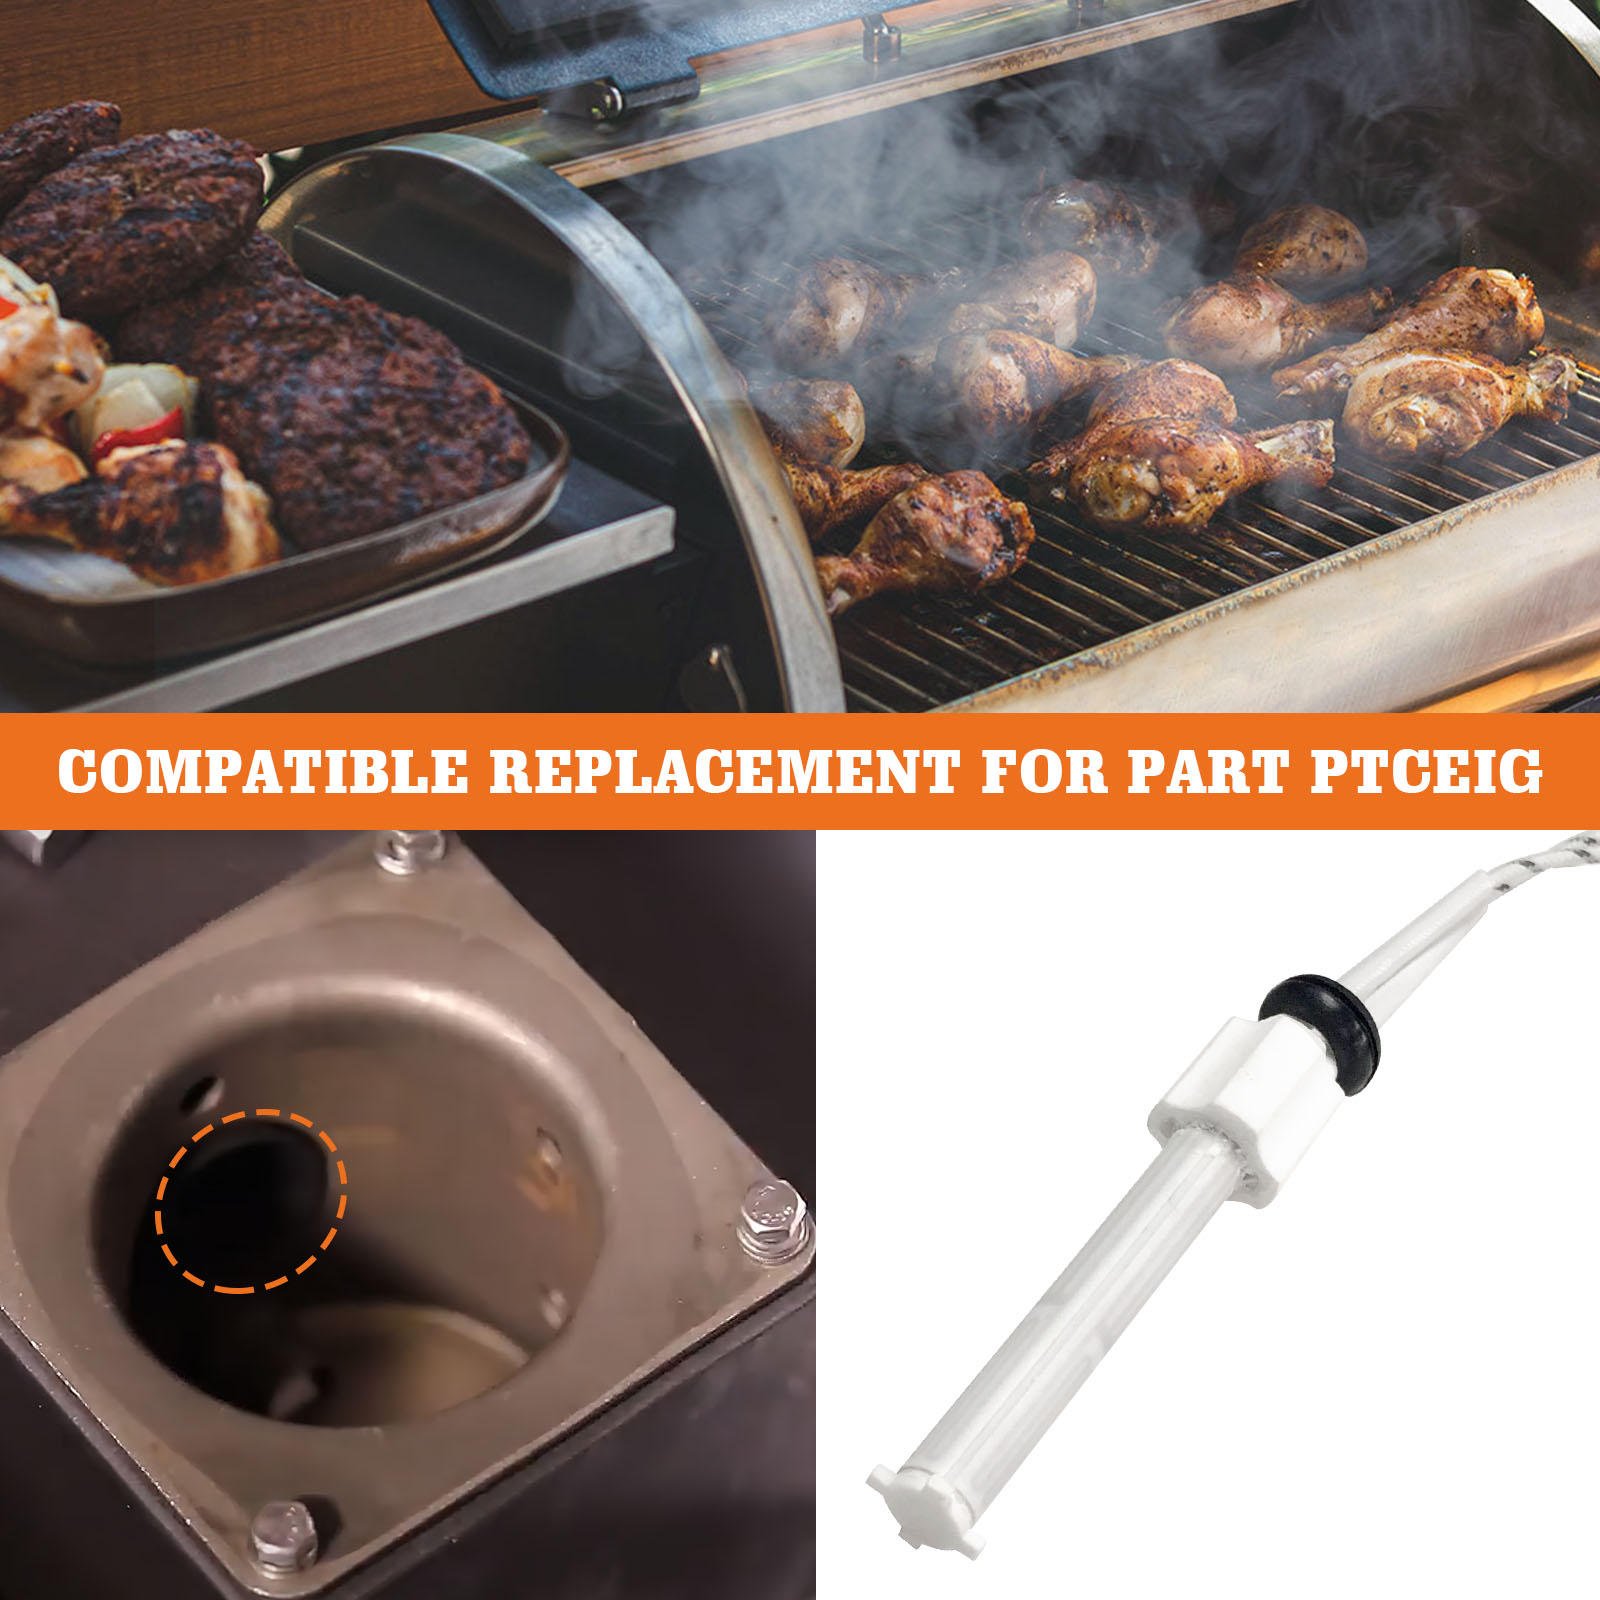  Ceramic Igniter Element Replacement for REC TEC, Recteq Wood  Pellet Grill and Smoker, 120V 80W : Patio, Lawn & Garden